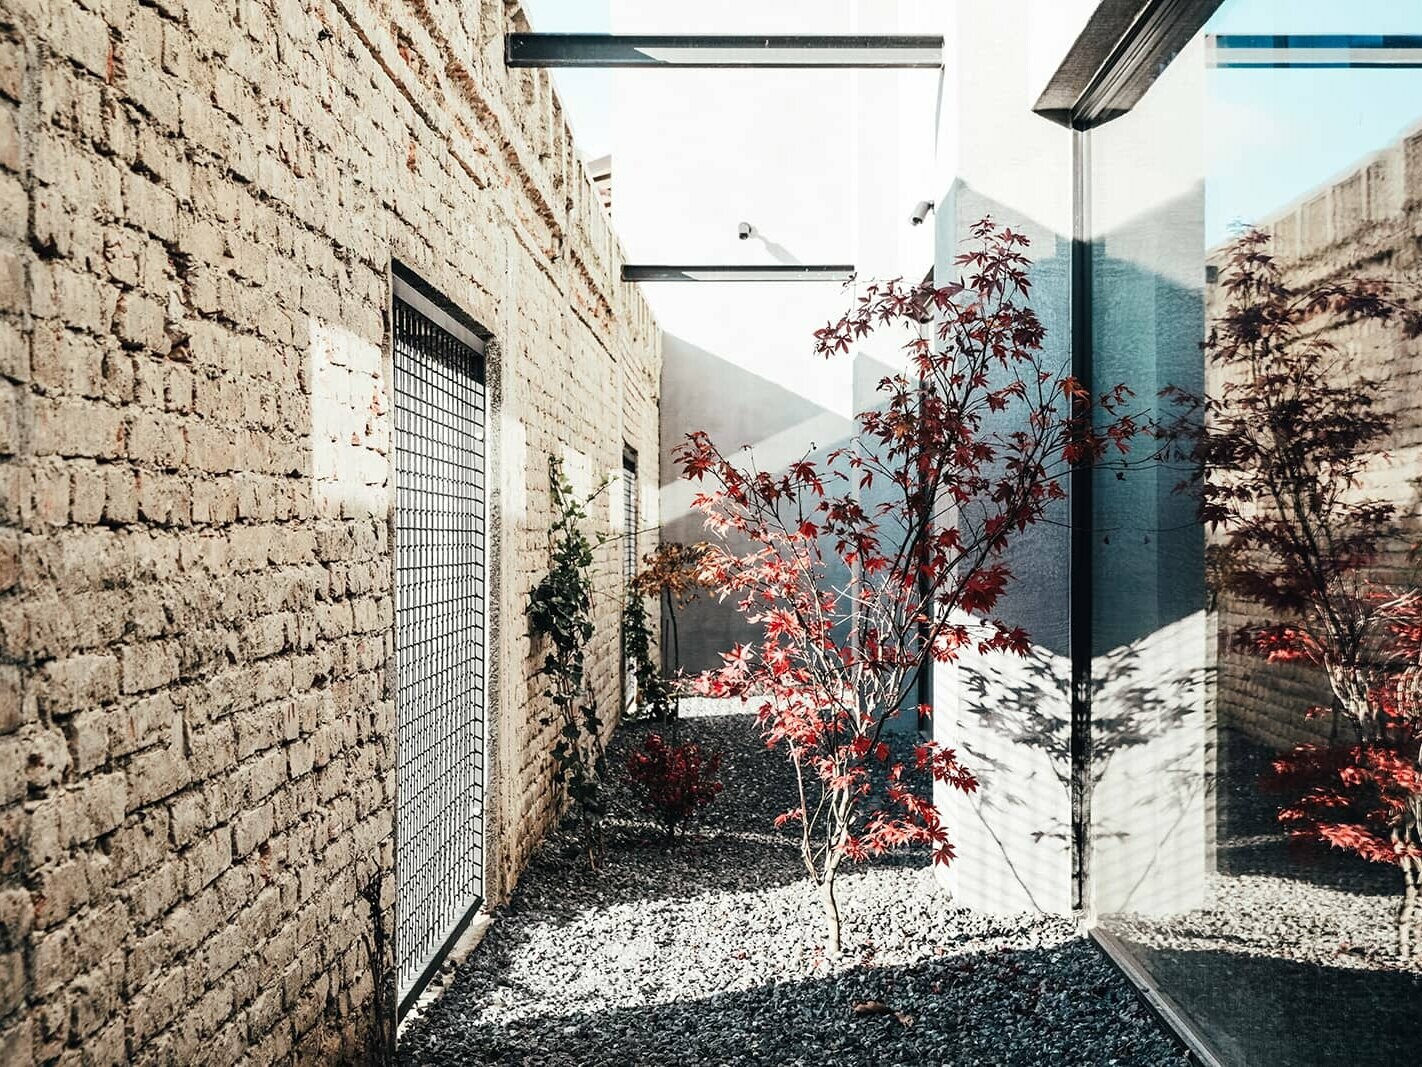 On the left is a brick wall, on the right a glass wall. In the middle is a tree with red leaves and illuminated by the sun.